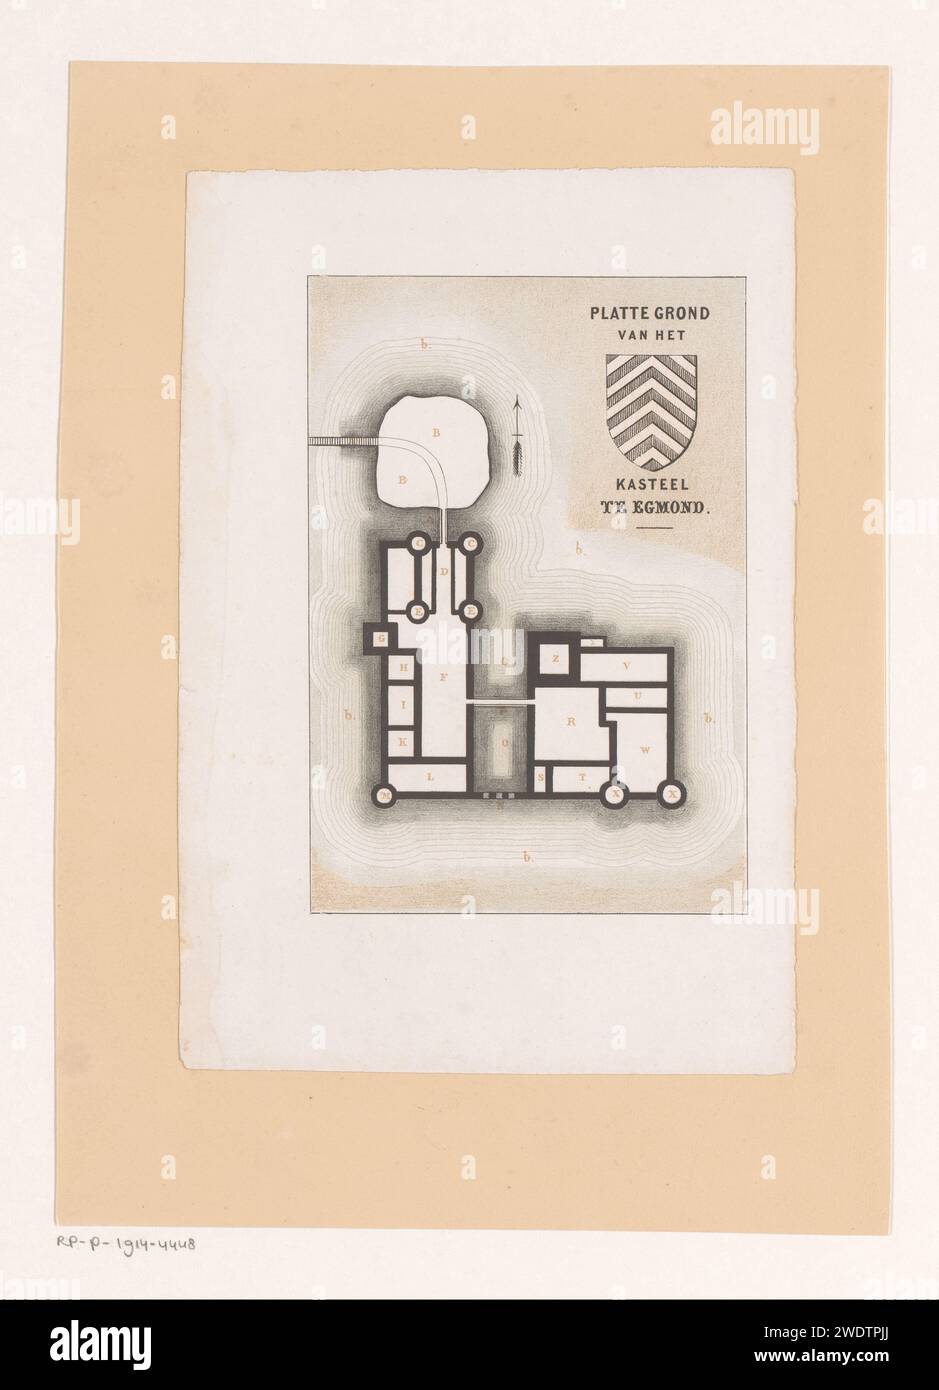 Map of the Castle in Egmond, Anonymous, Royal Dutch Stone Pressure of C.W. Mieling (attributed to), 1854 - 1861 print There are letters in the map. On the right a coat of arms. The Hague paper  plan  architecture. castle Egmond Stock Photo